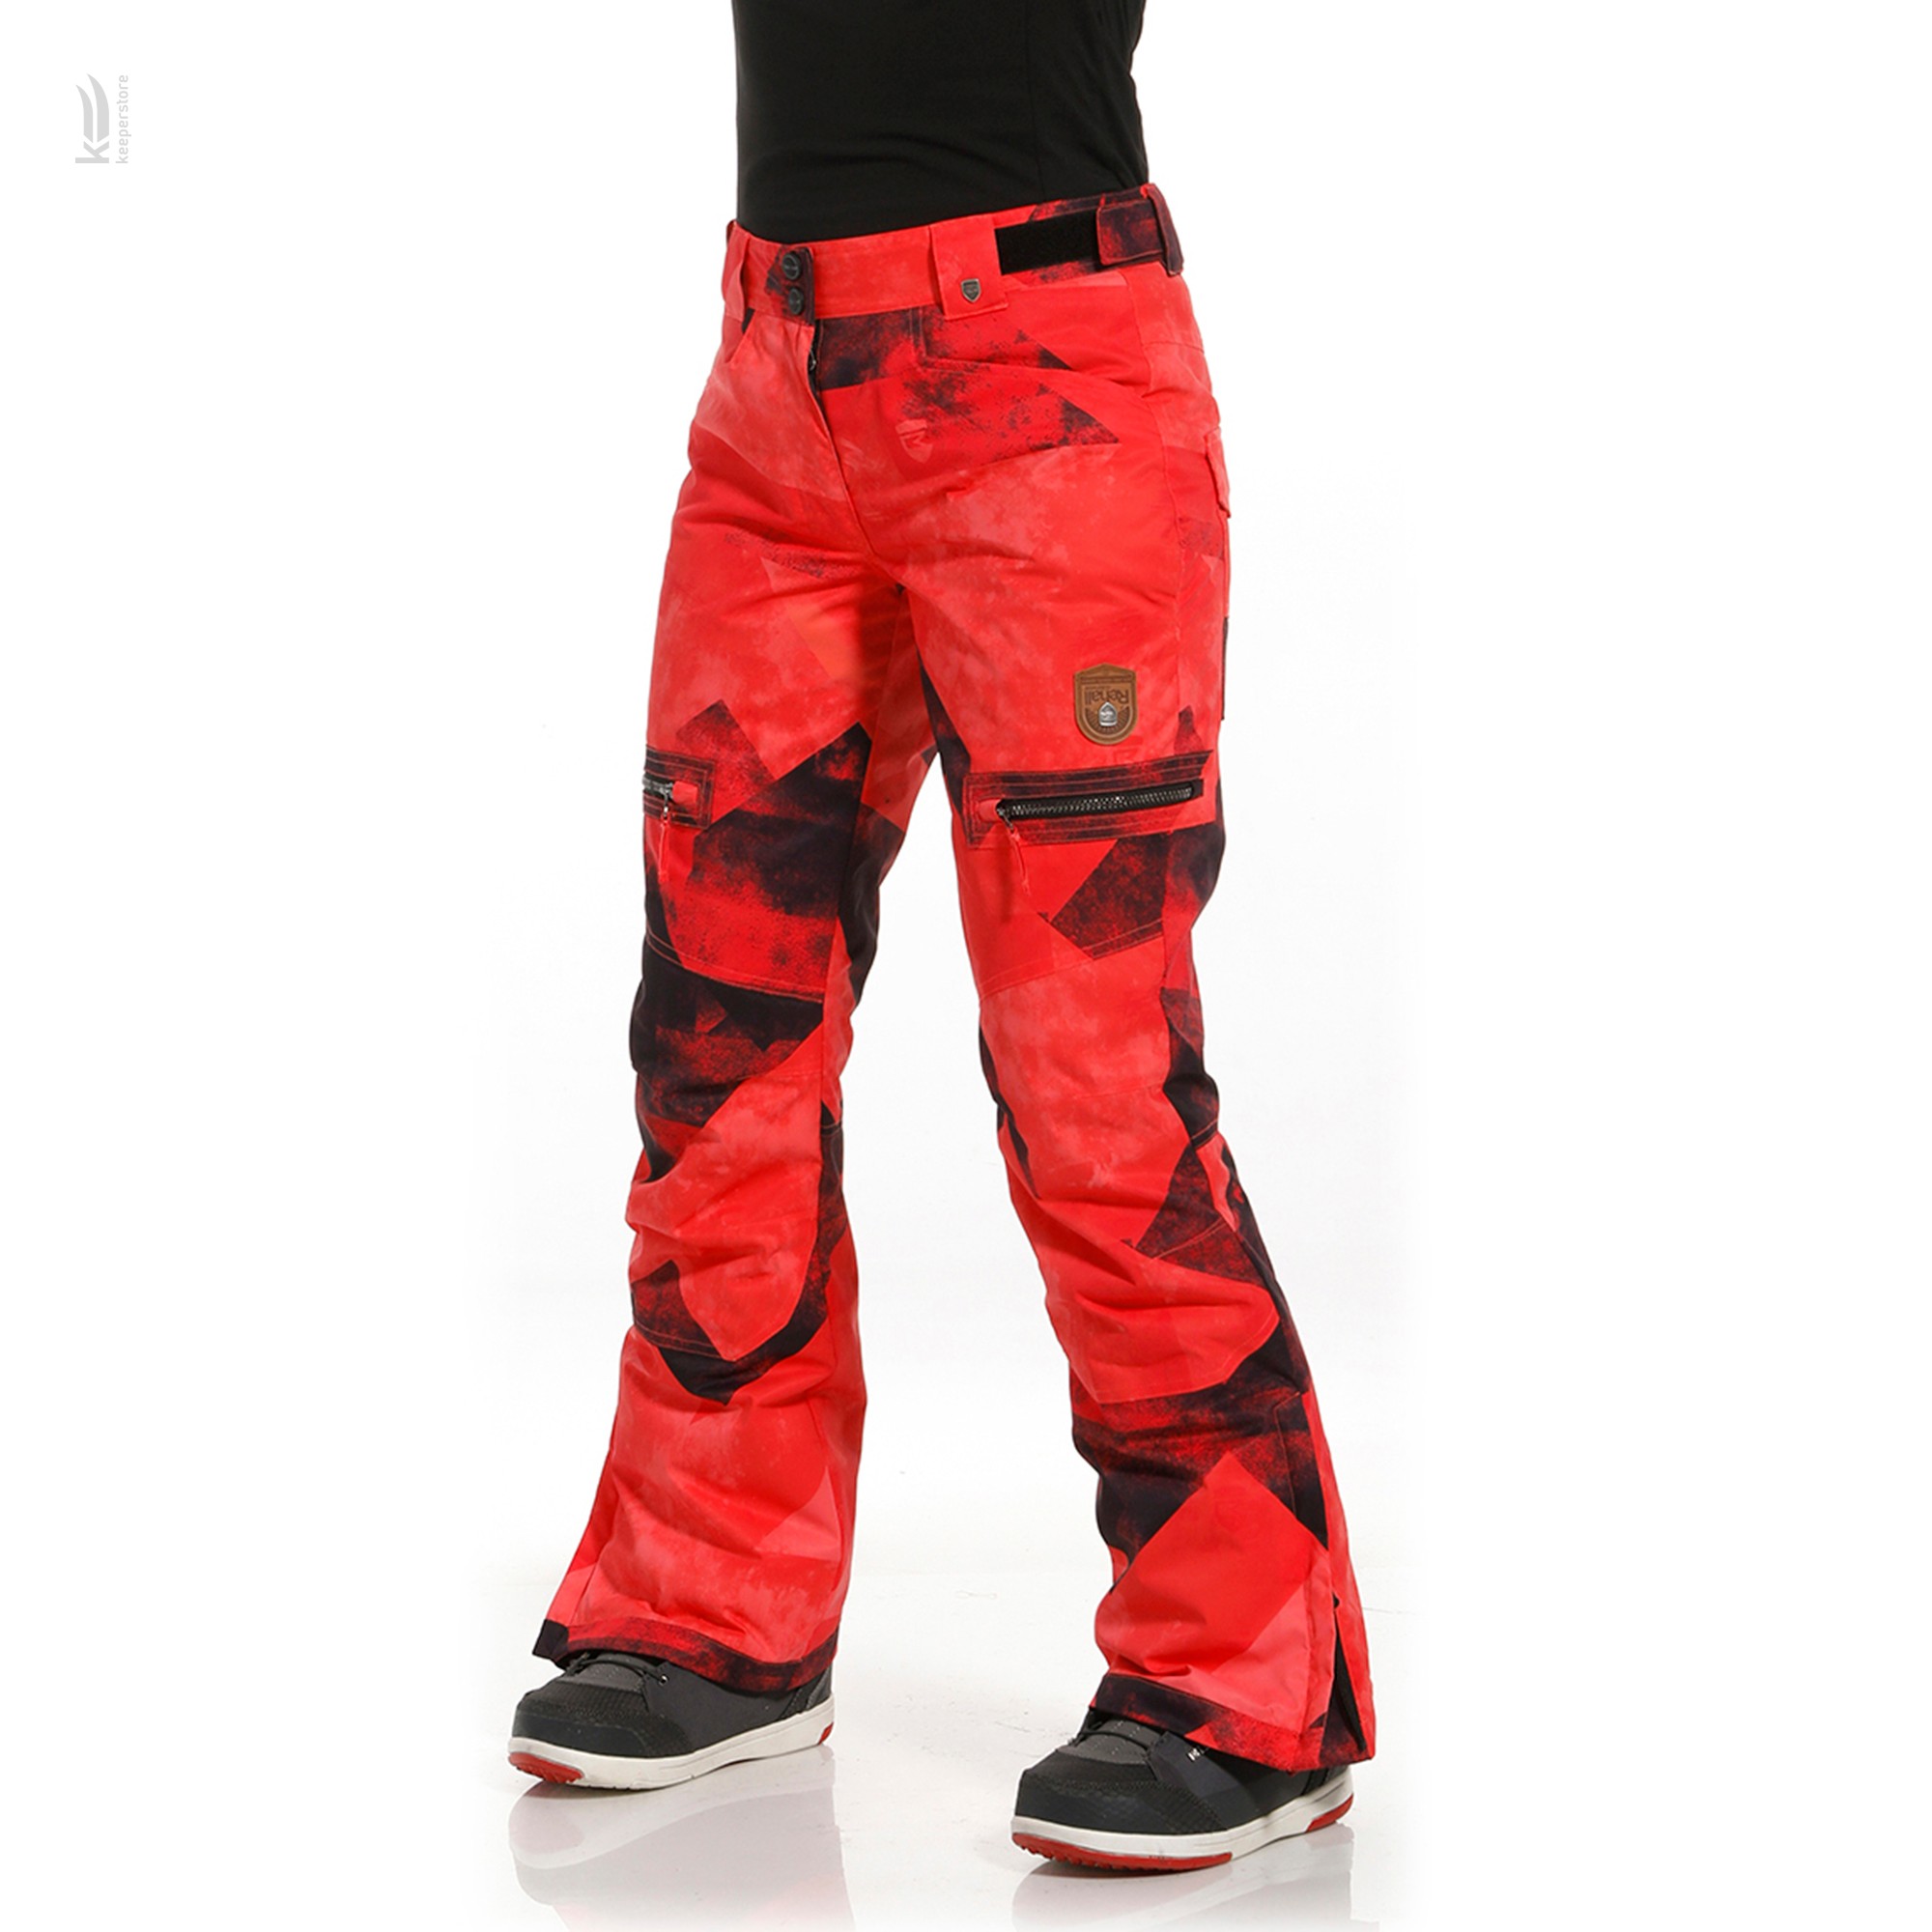 Rehall KEELY-R Snowpants Womens Graphic Mountains Red Pink (L)